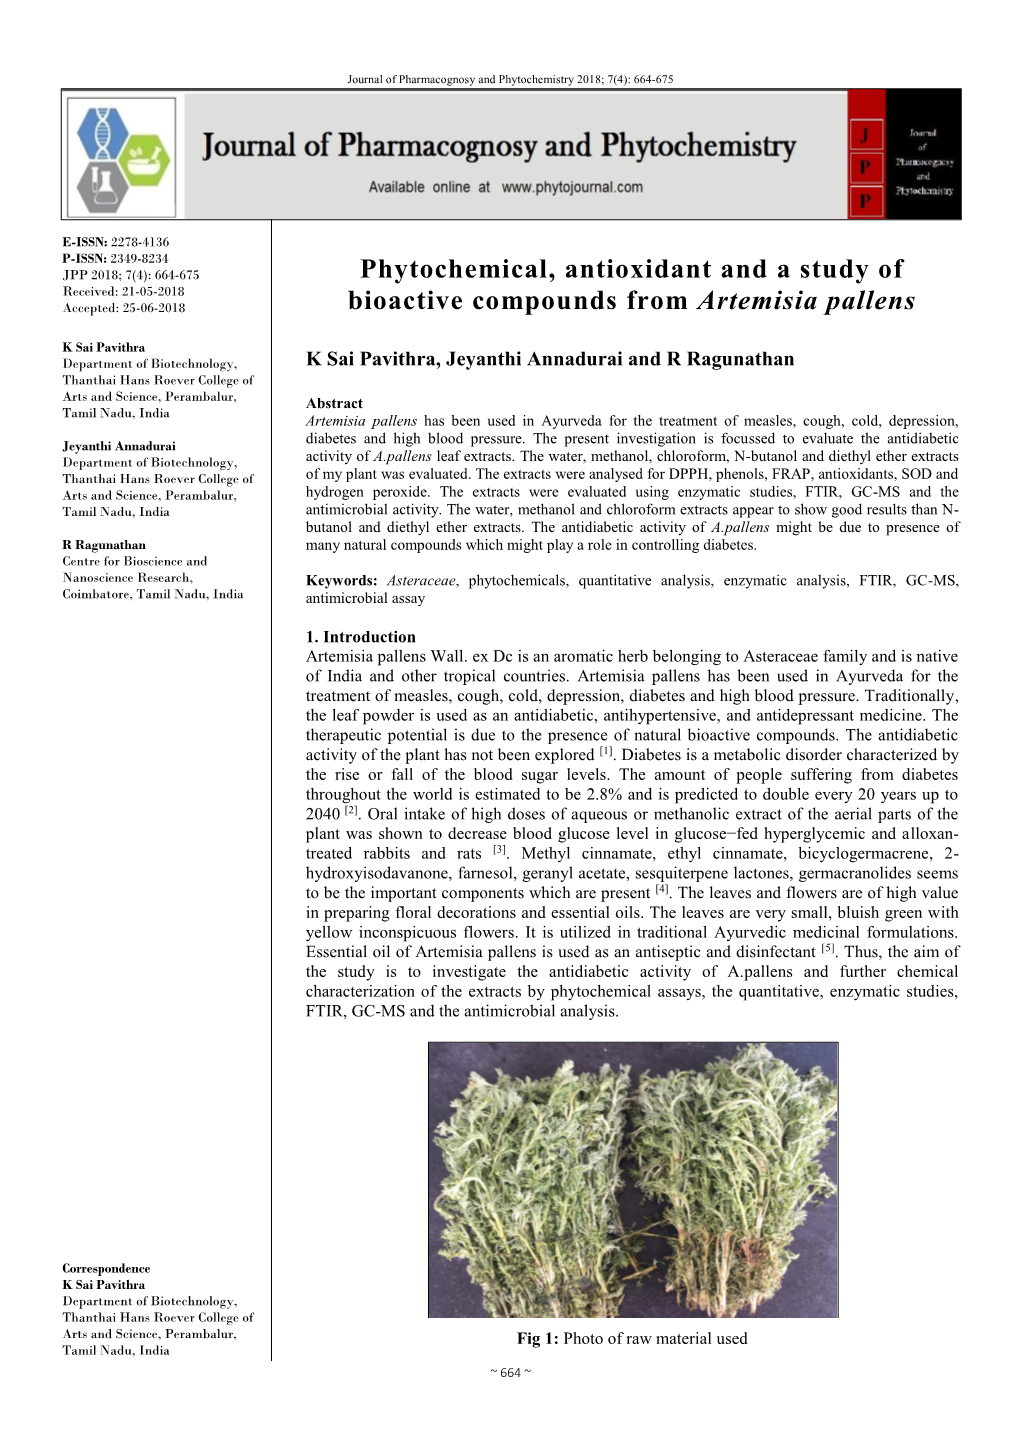 Phytochemical, Antioxidant and a Study of Bioactive Compounds From